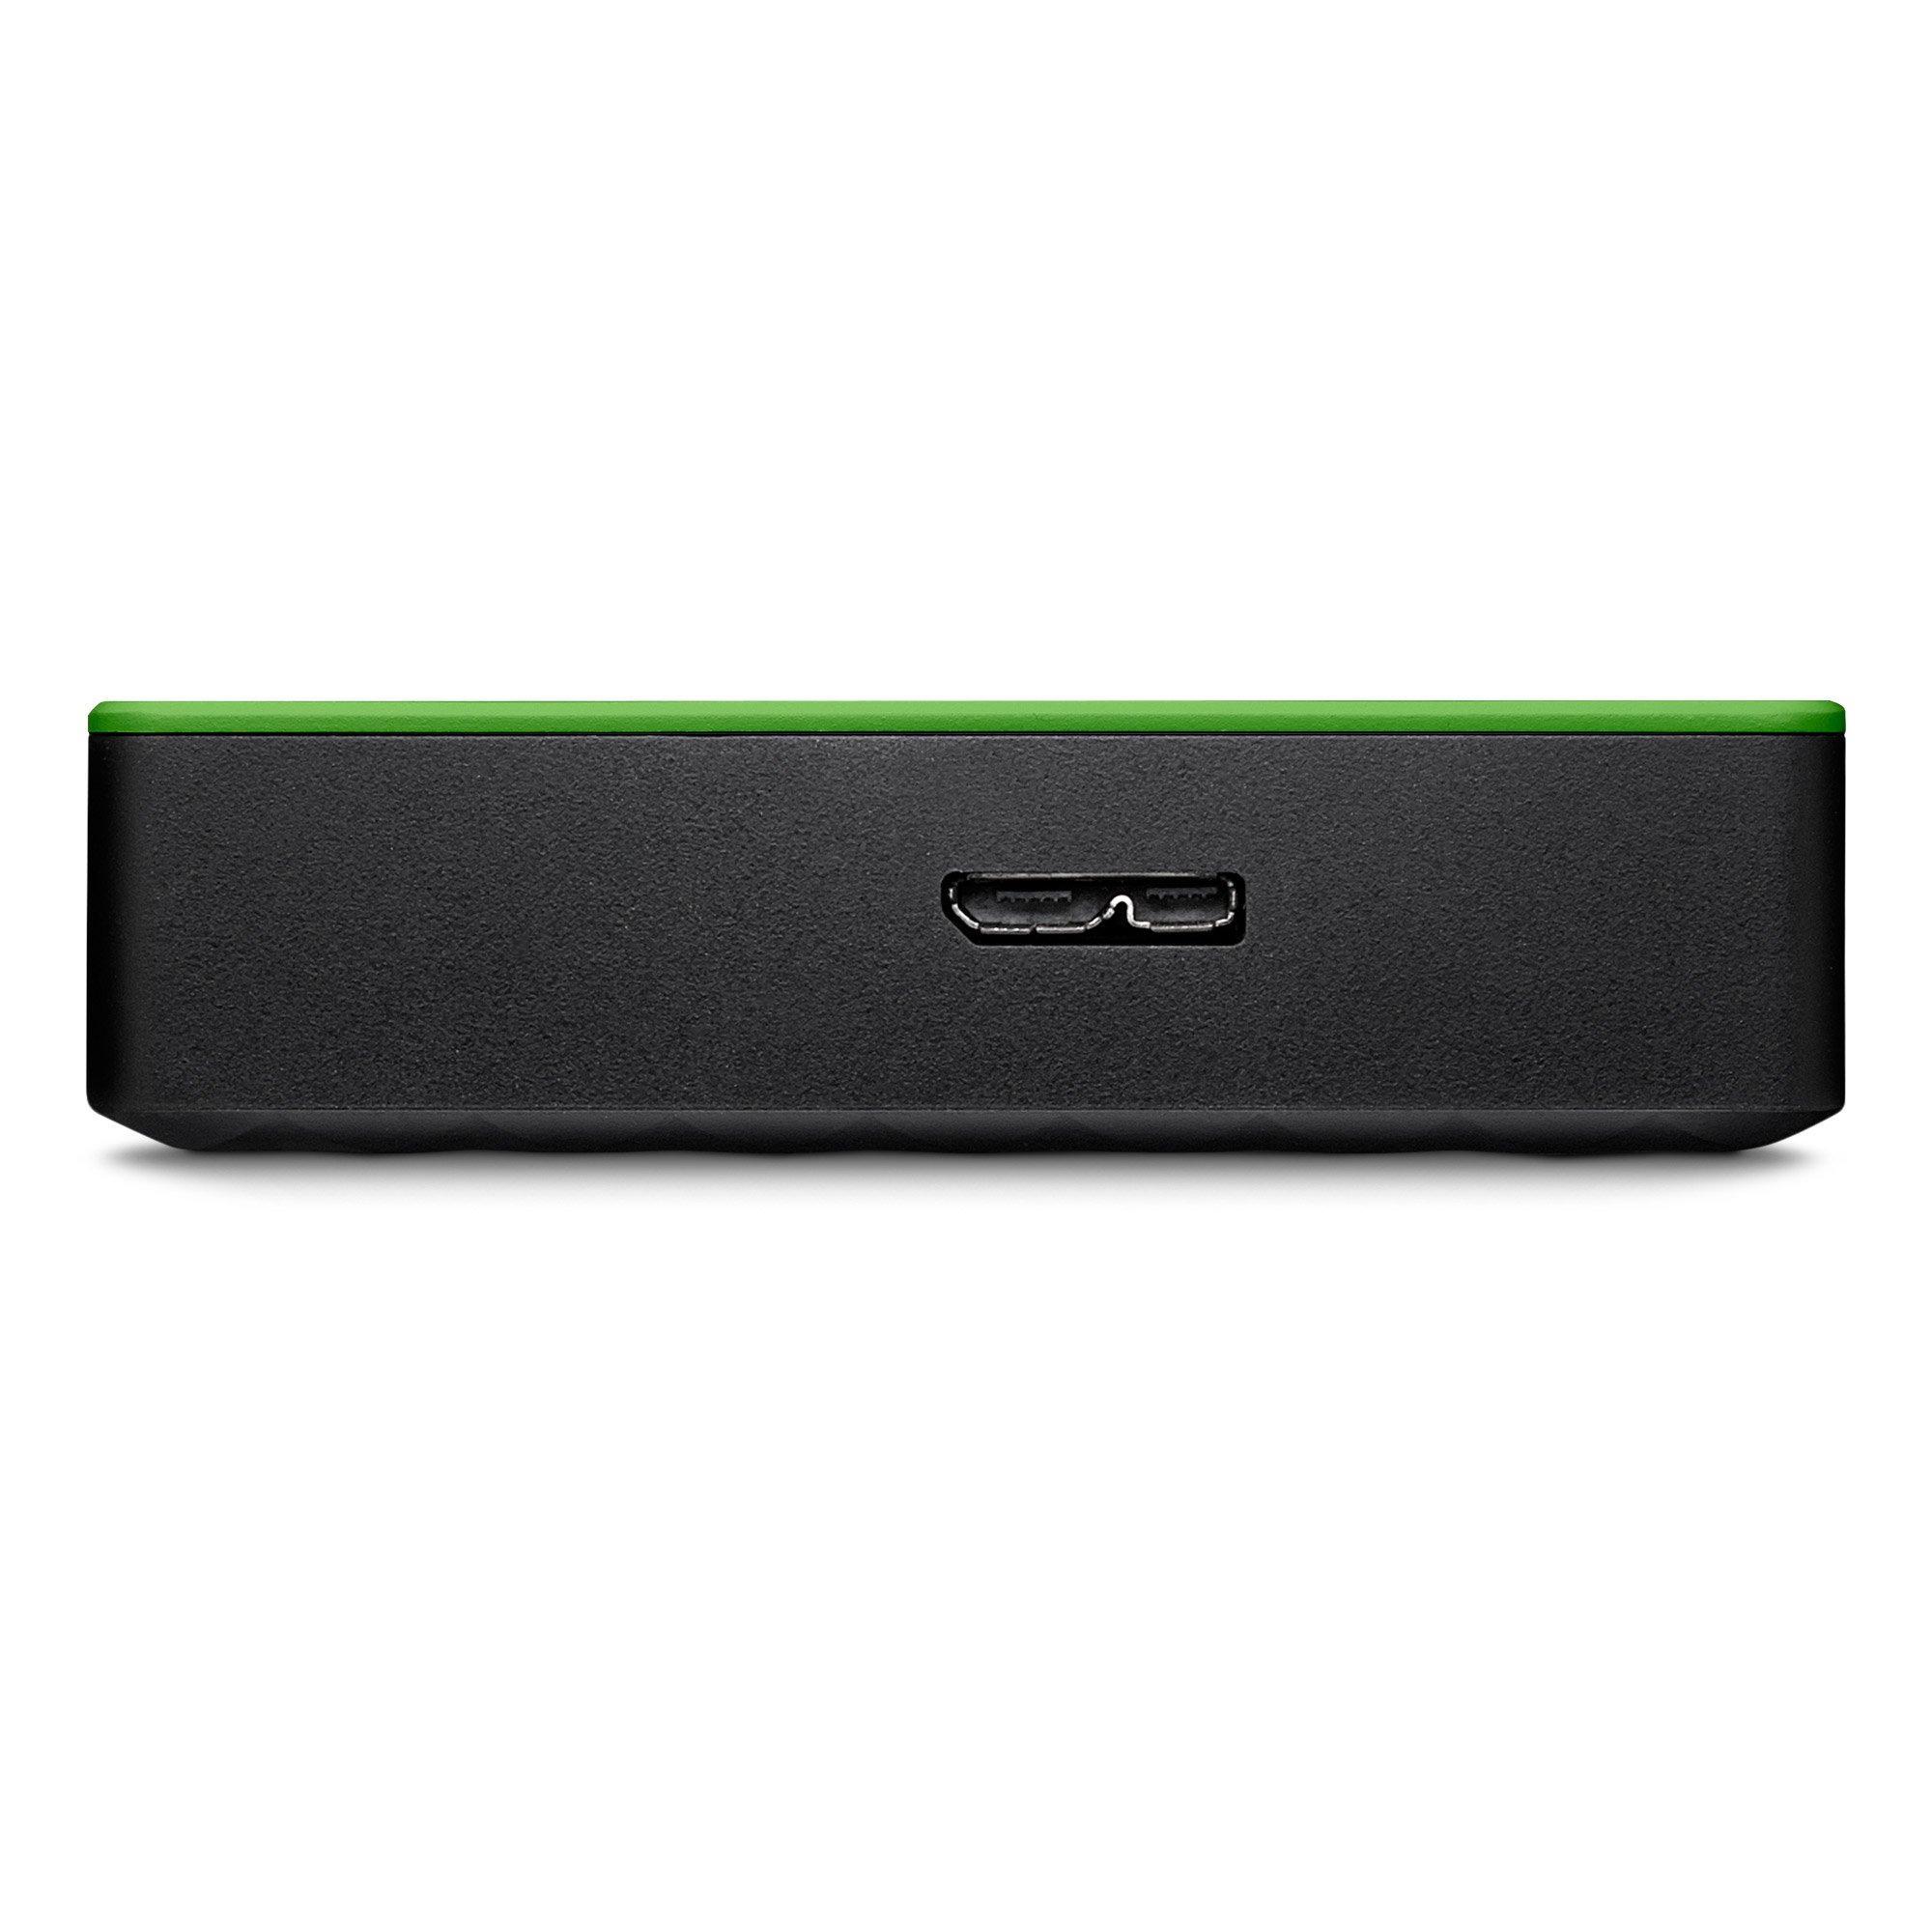 4tb external hard drive for xbox one